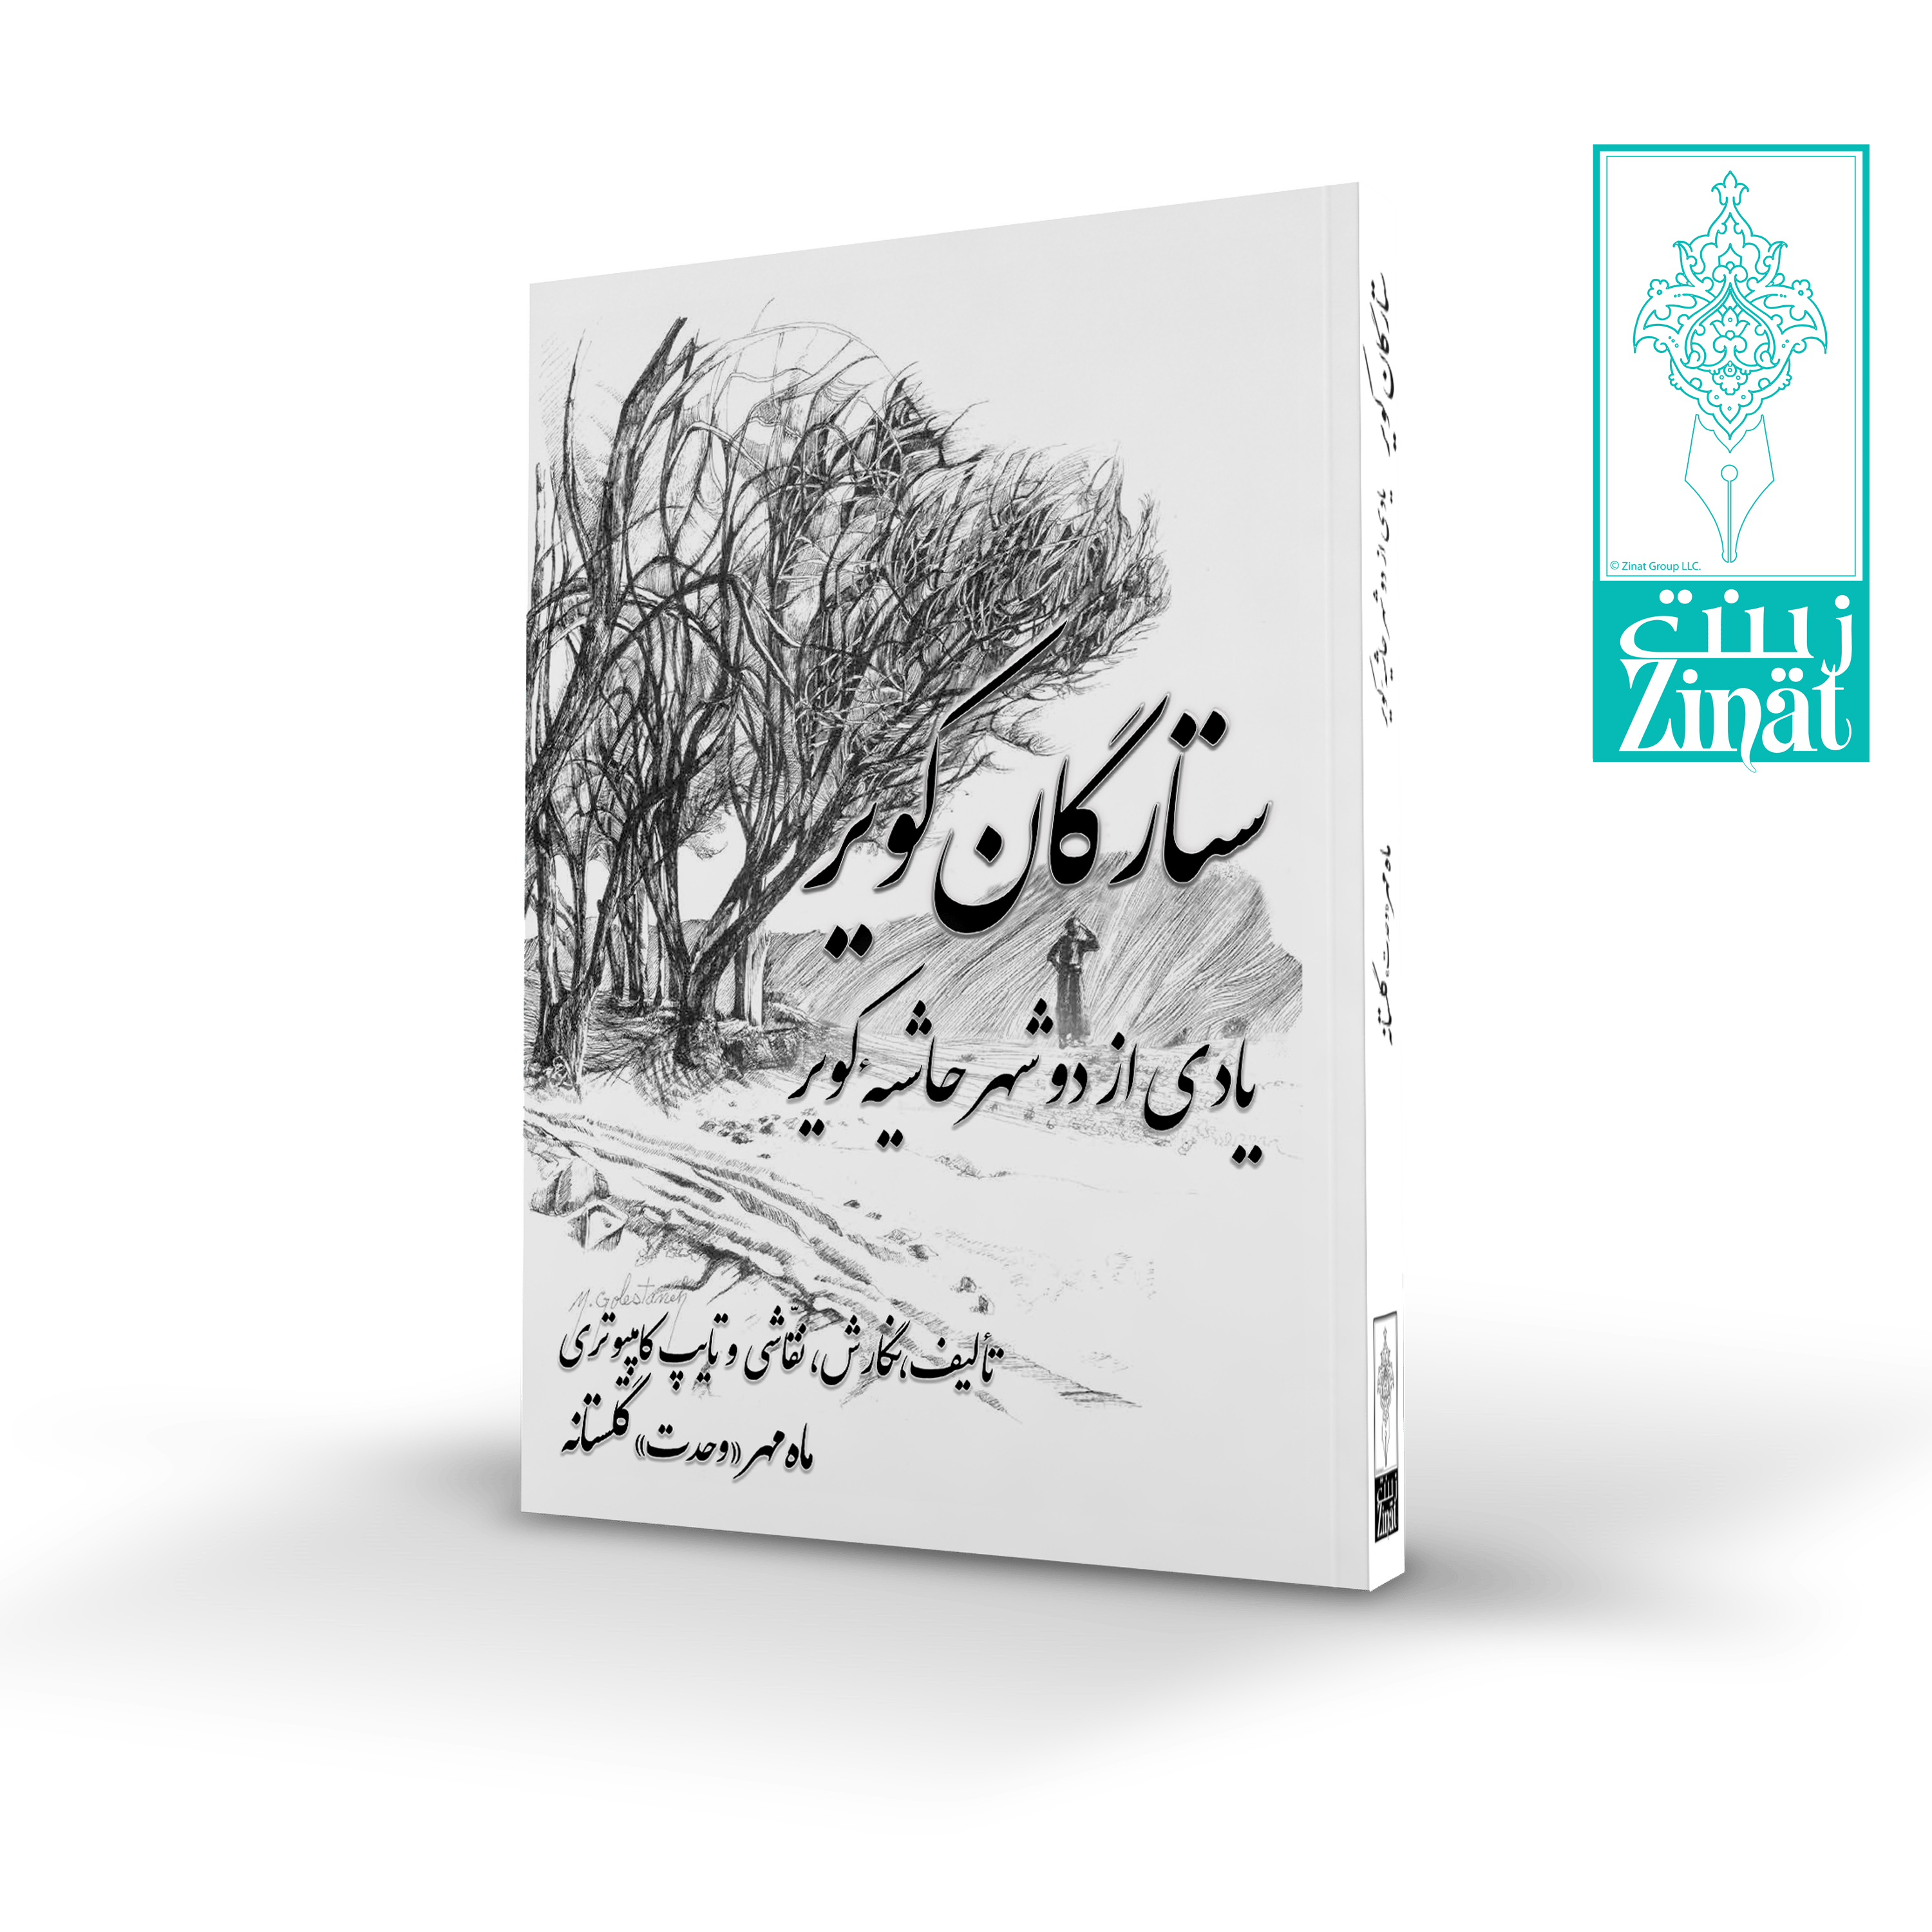 Setaregan-iː Kaveer ستارگان کویر Ms. Golestaneh's ninth book about early pioneers from two cities at the edge of the desert in Iran. The visits with the Master and the Guardian and a great wealth of never seen tablets and photographs